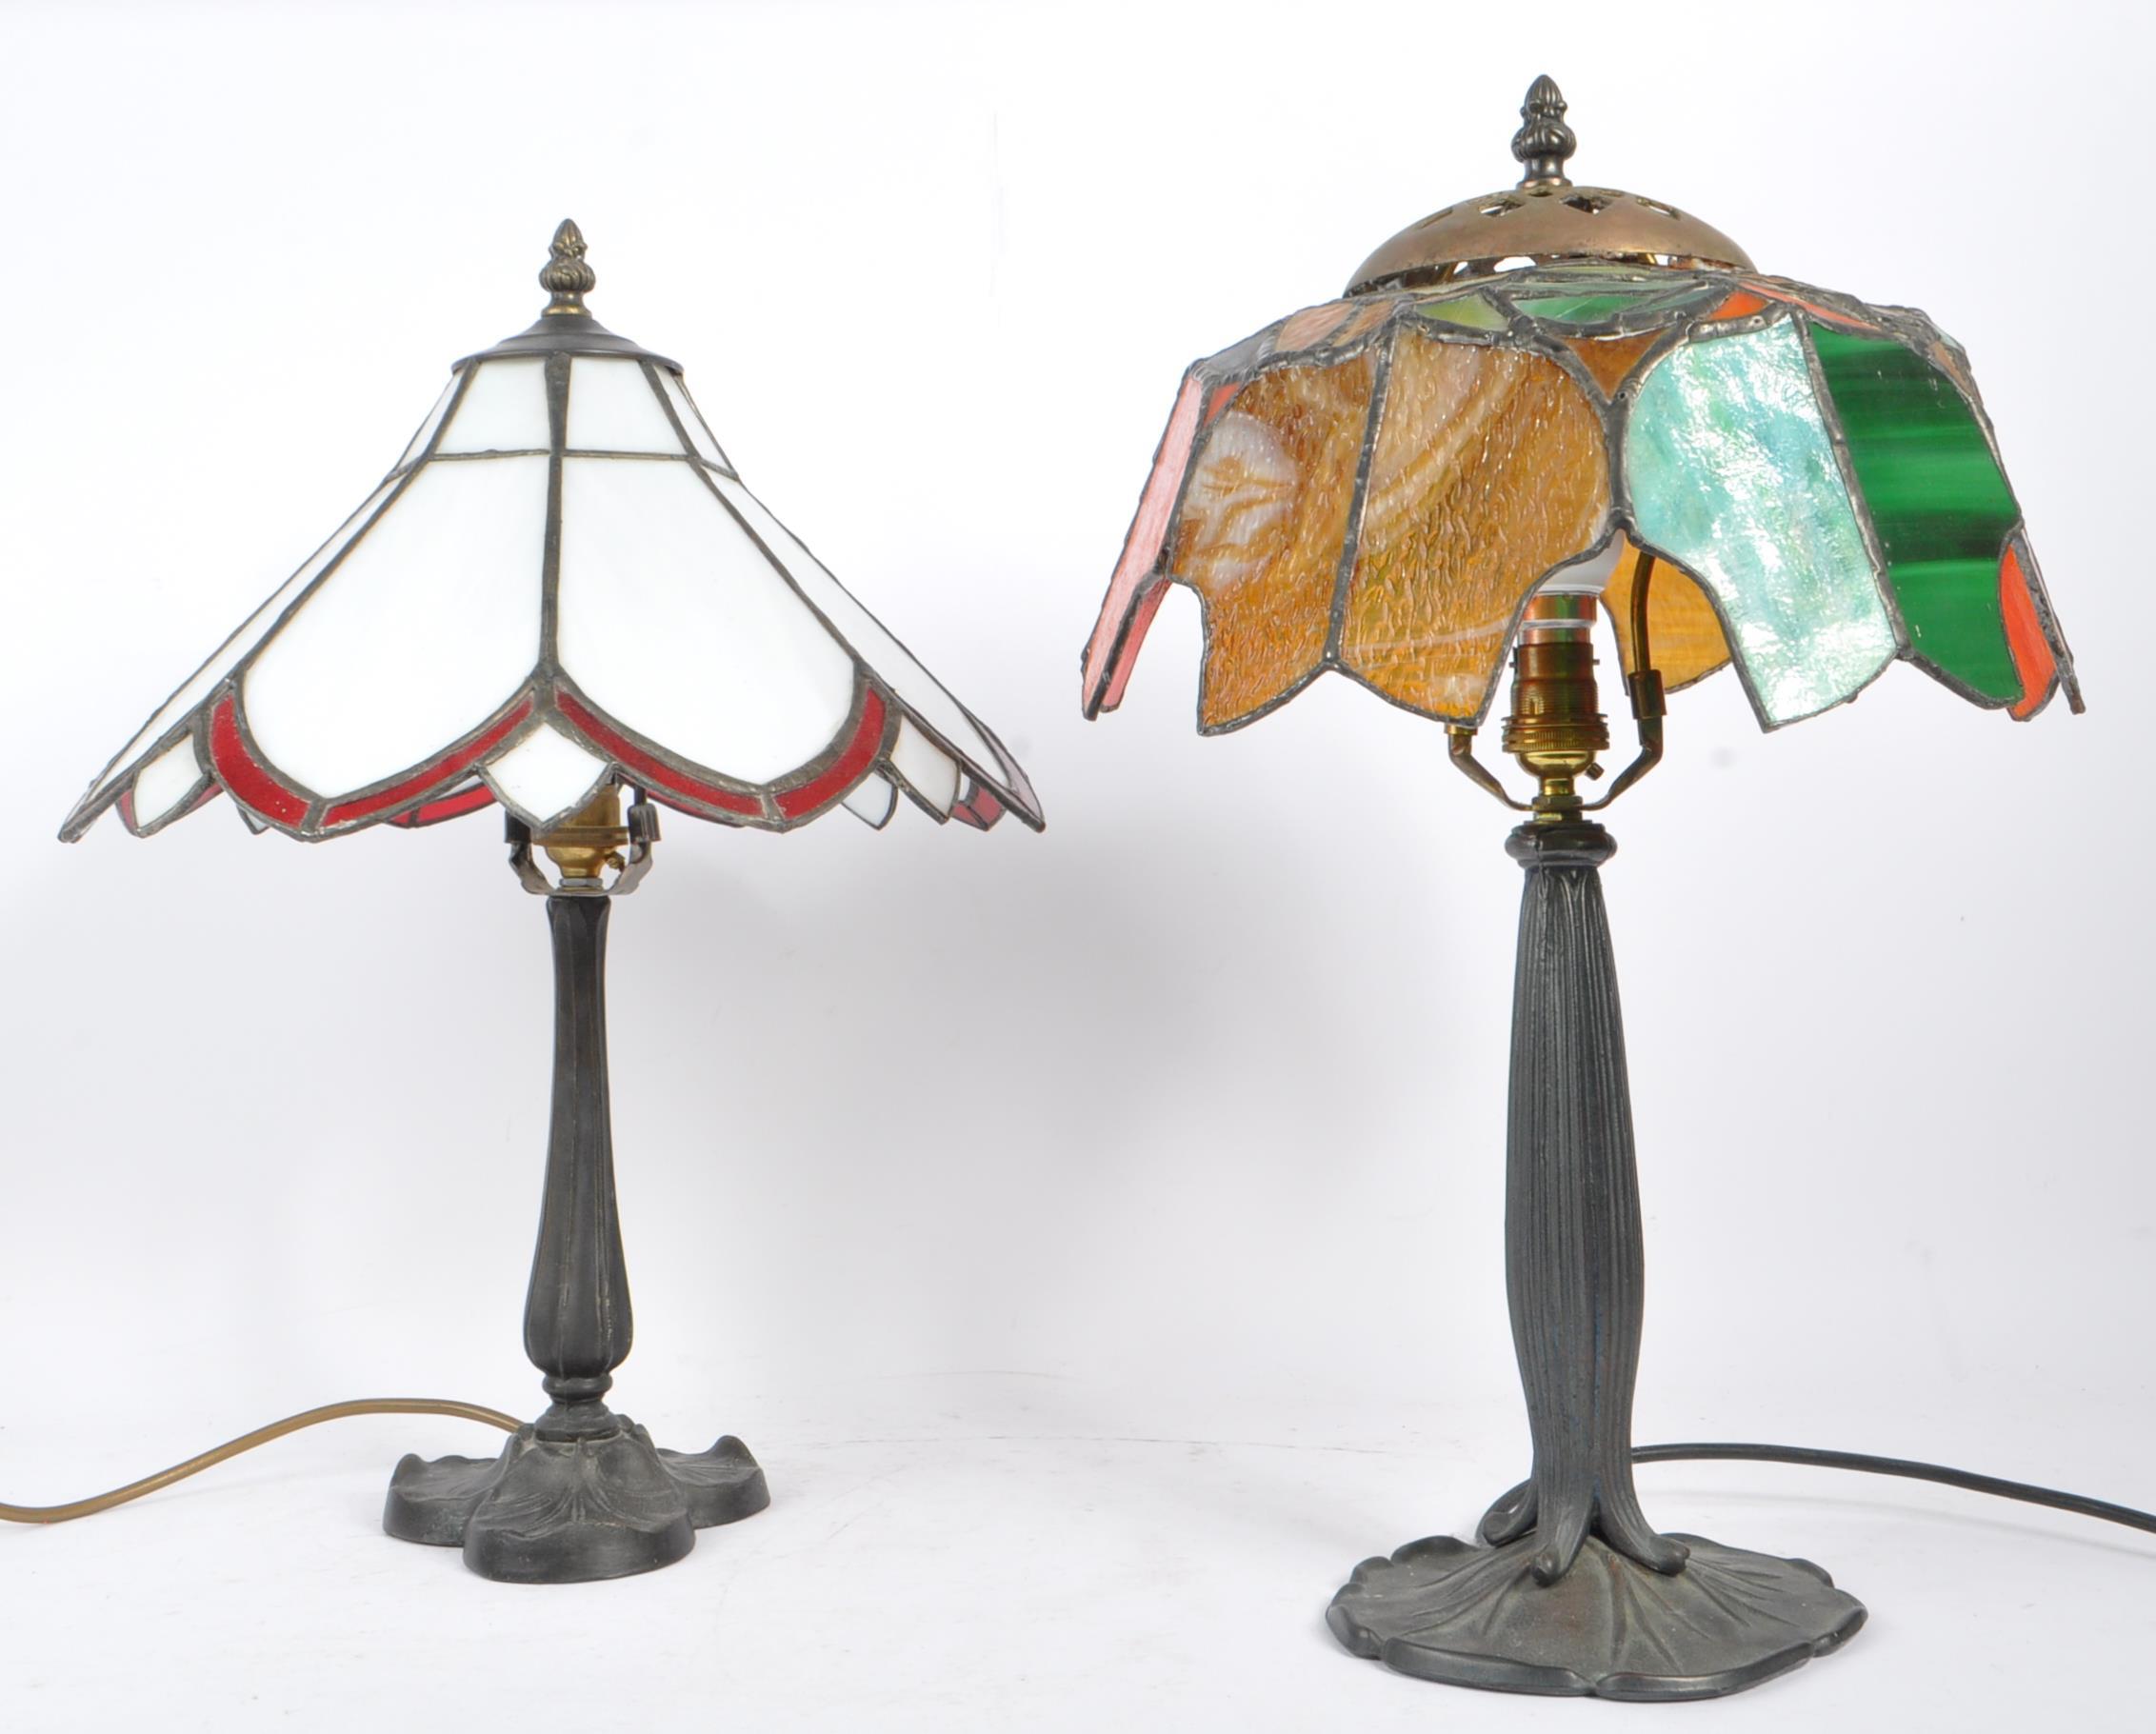 TWO 20TH CENTURY TIFFANY SIDE TABLE LAMPS - Image 6 of 6